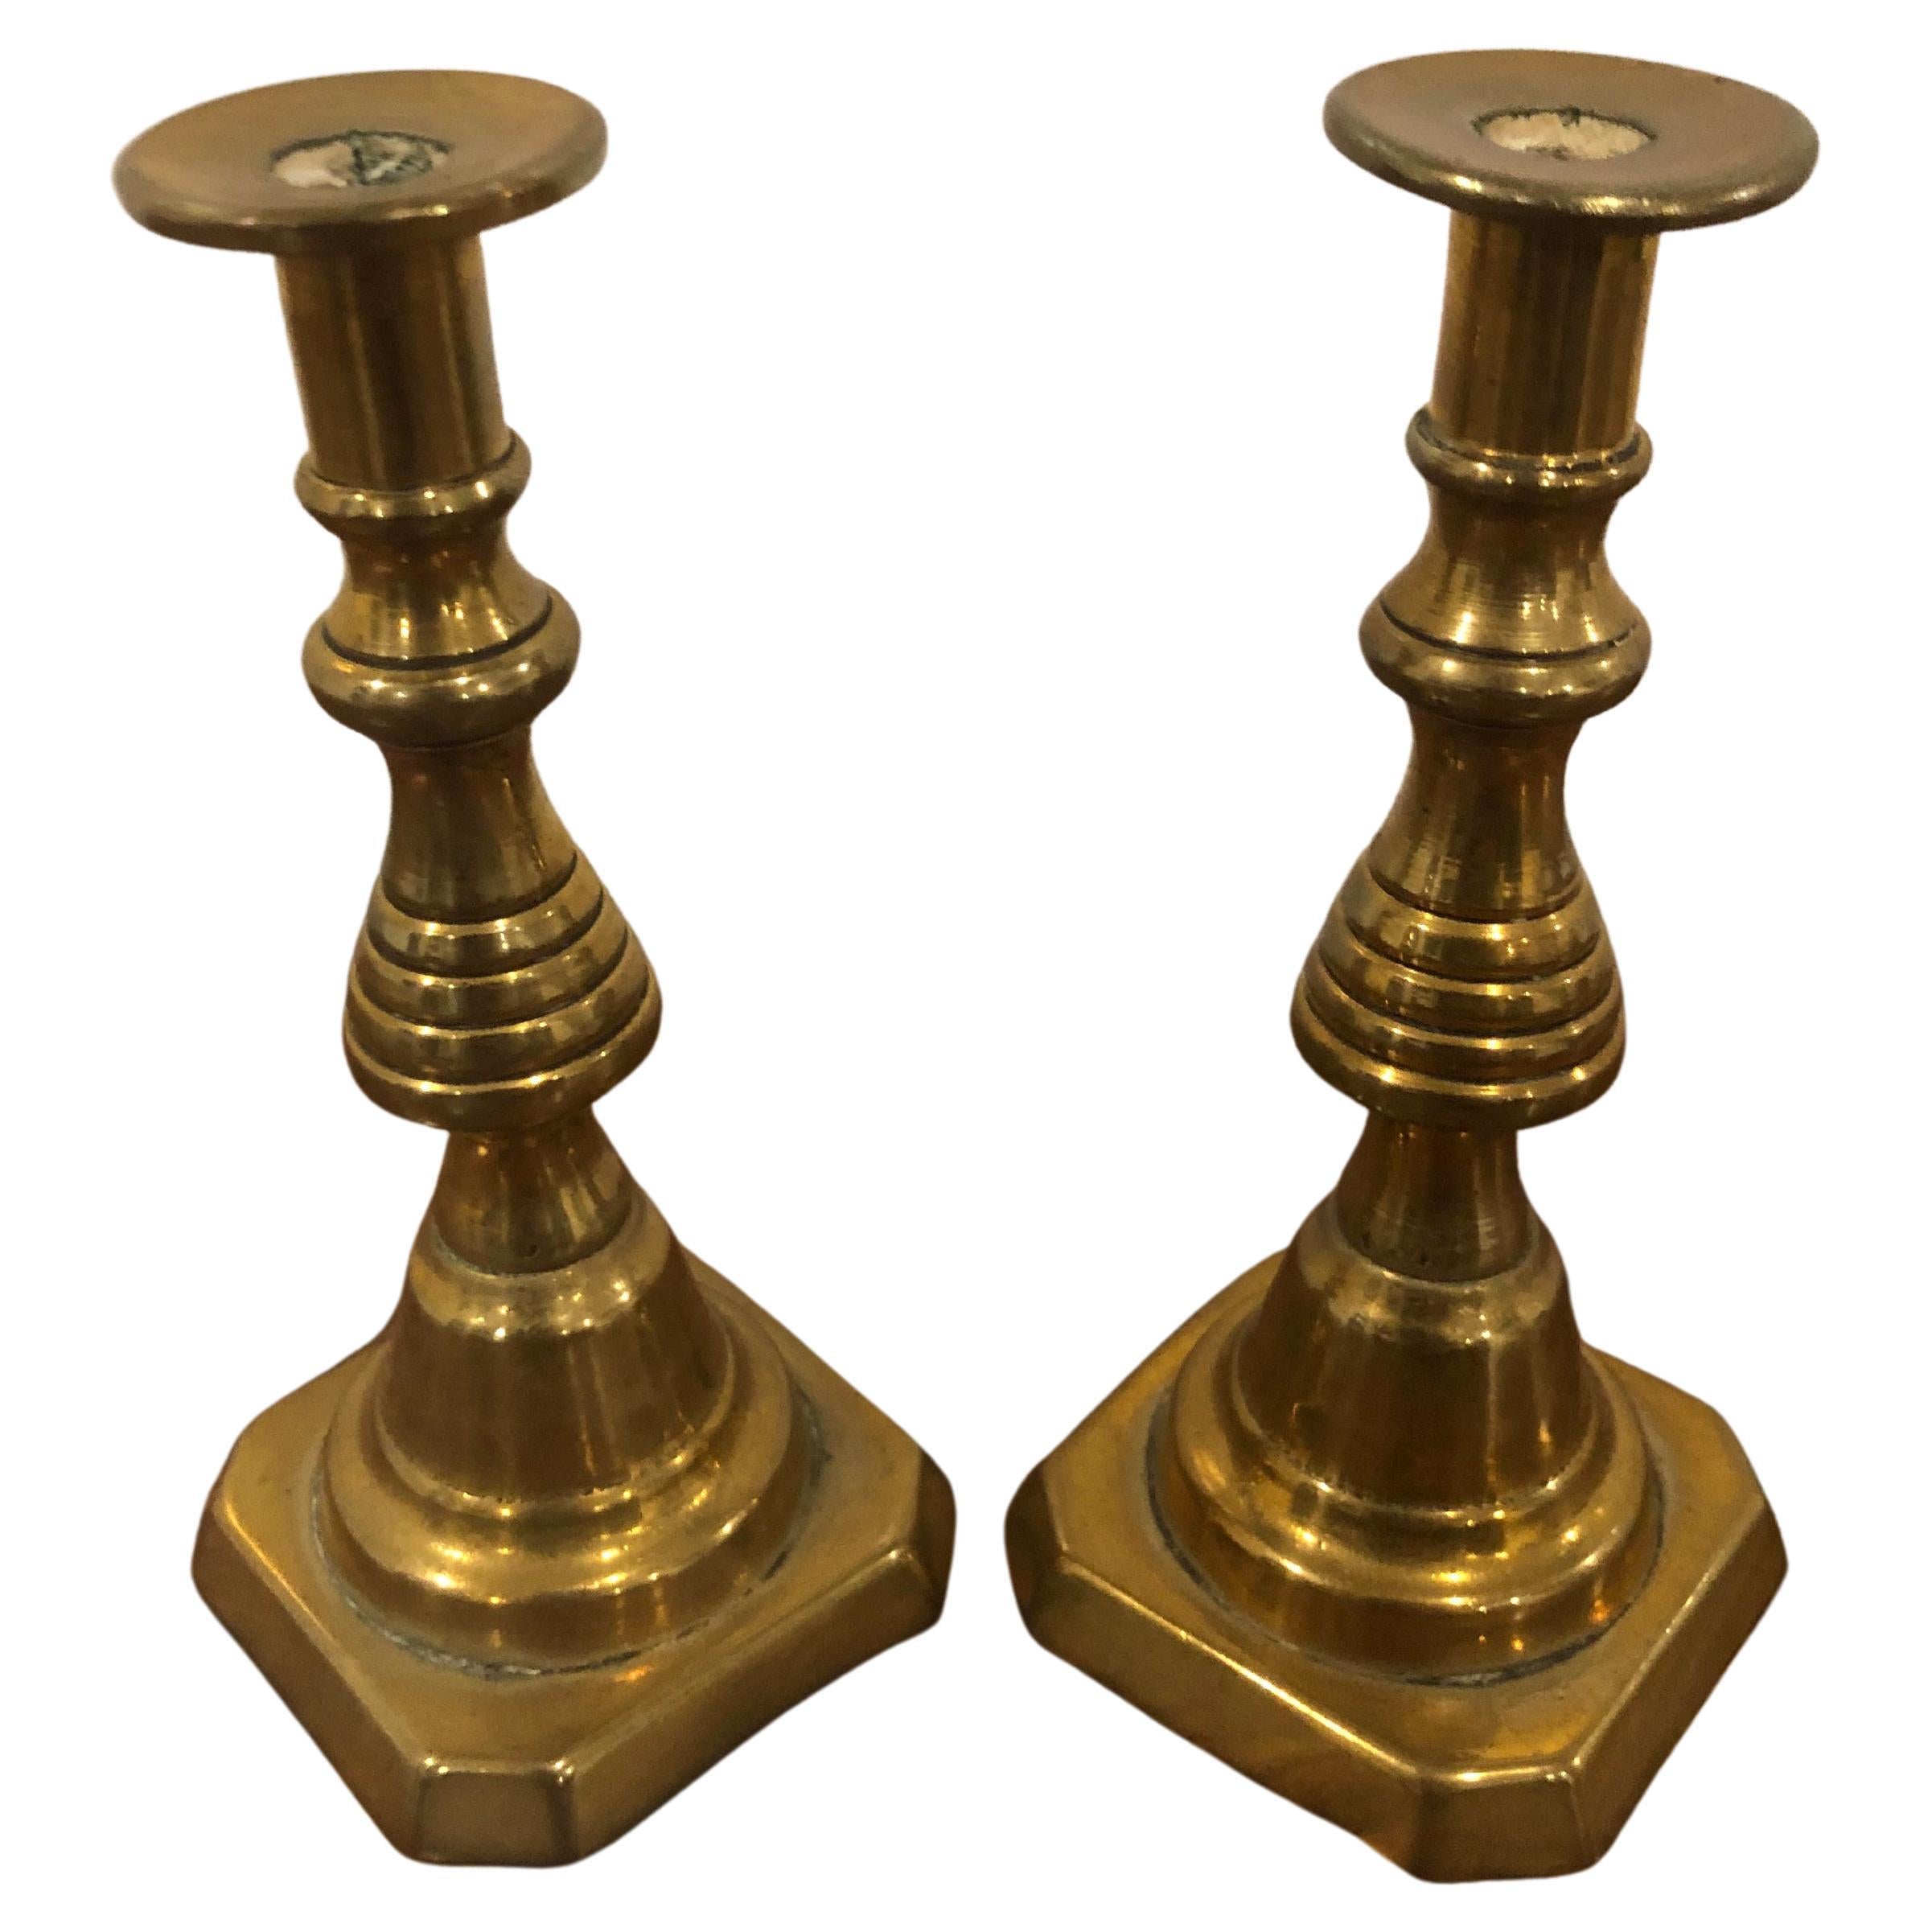 Vintage Lacquered Brass Candelabras by Century